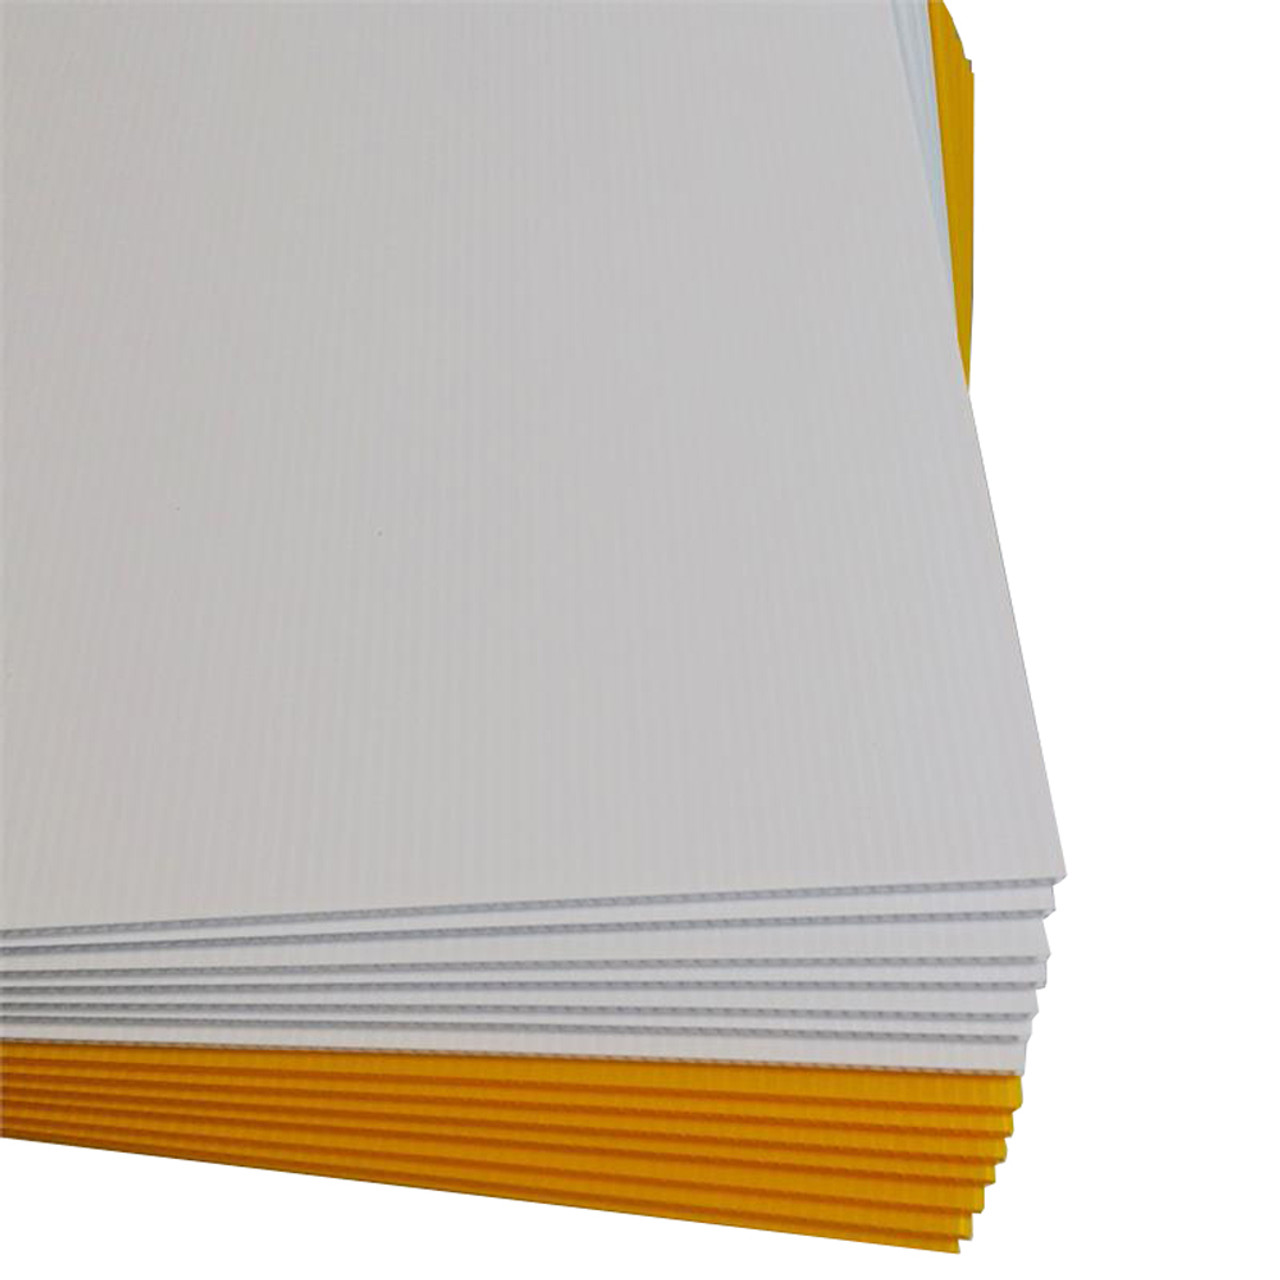 T-SIGN Corrugated Plastic Sheets Coroplast Sign Blank Board, 24 x